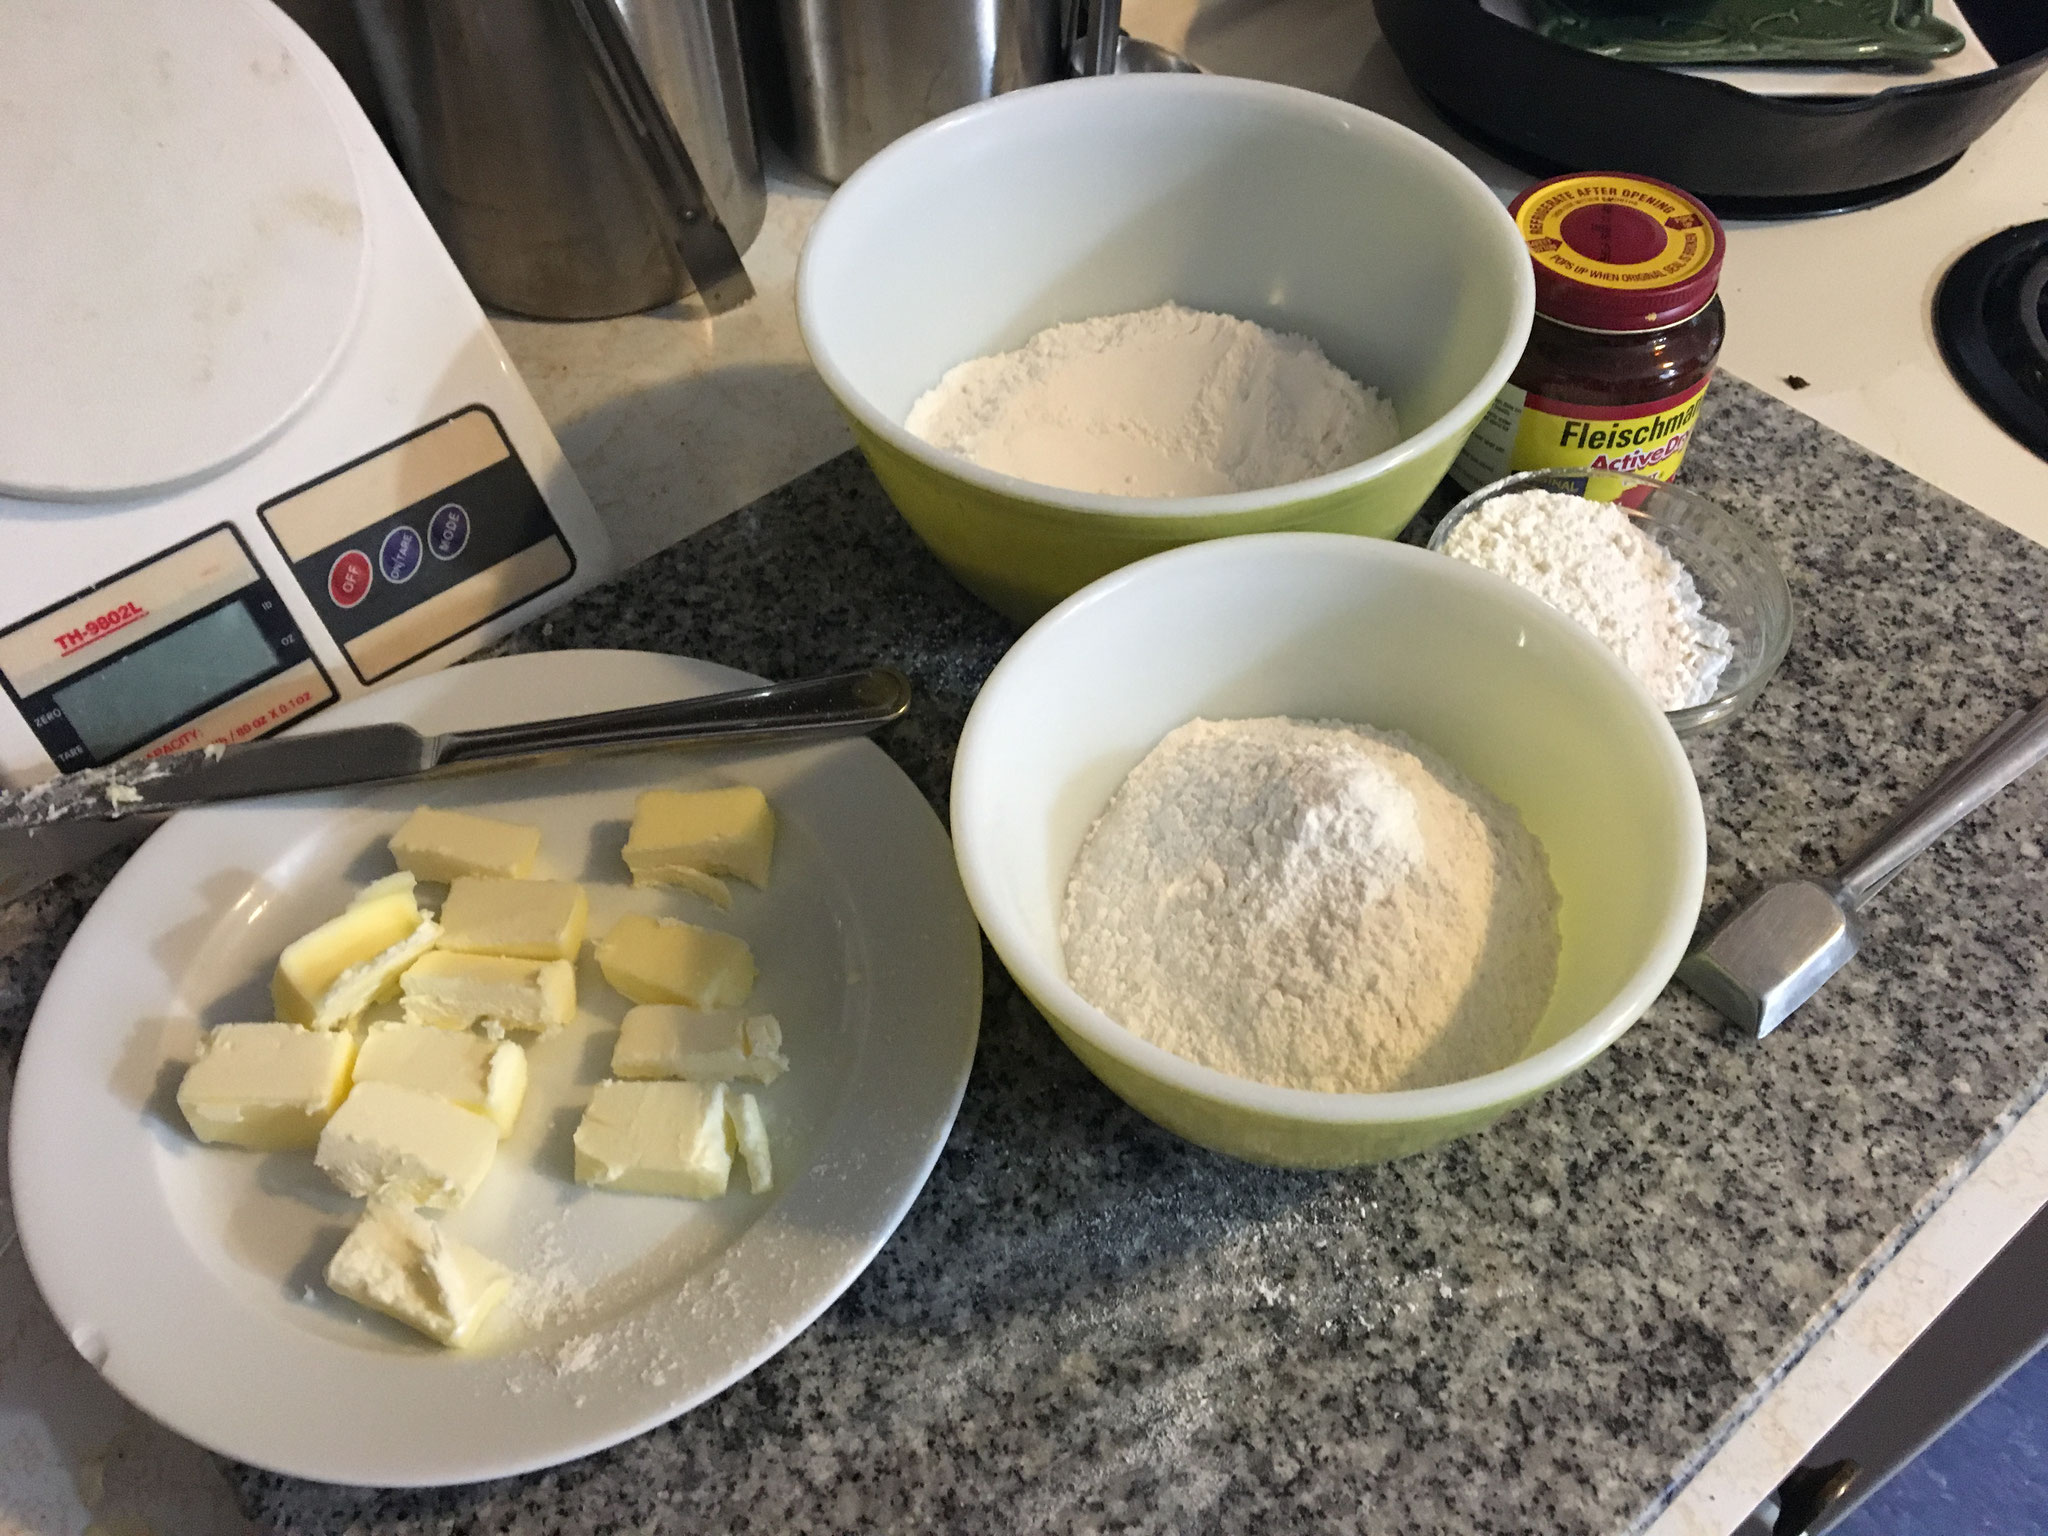 Yeast, flour, and butter